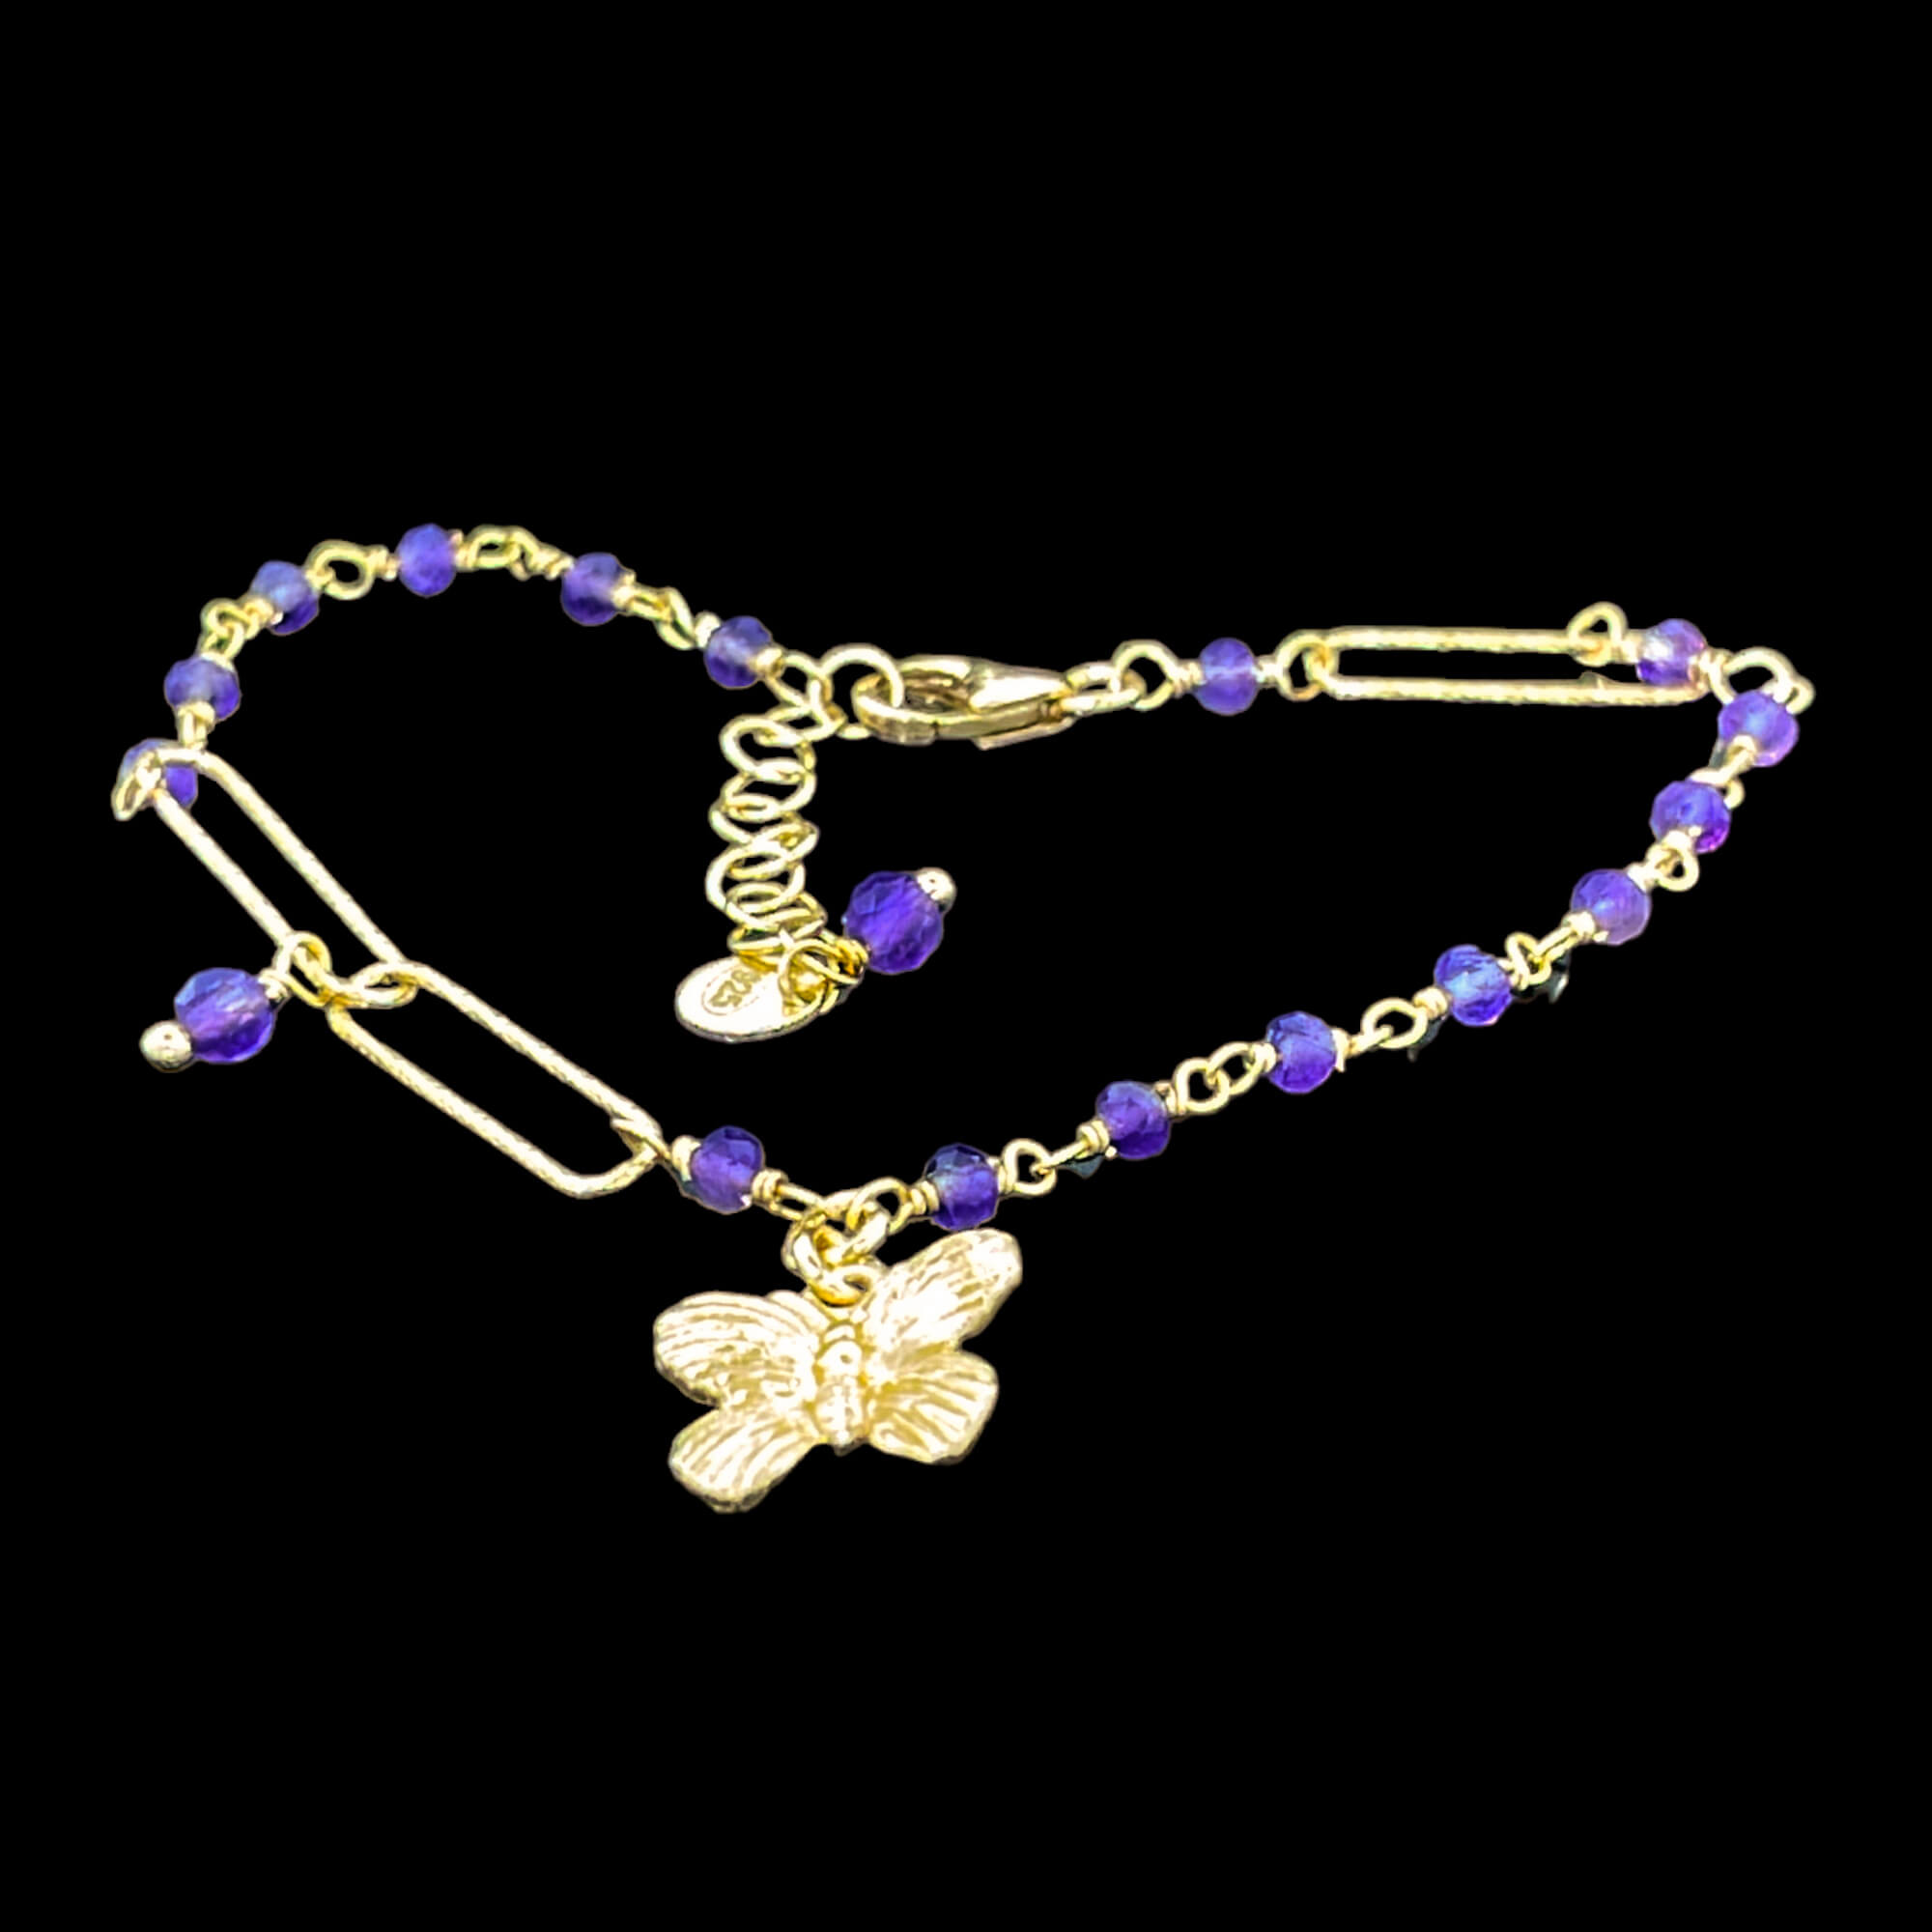 Gilded bracelet with amethyst stones and a butterfly